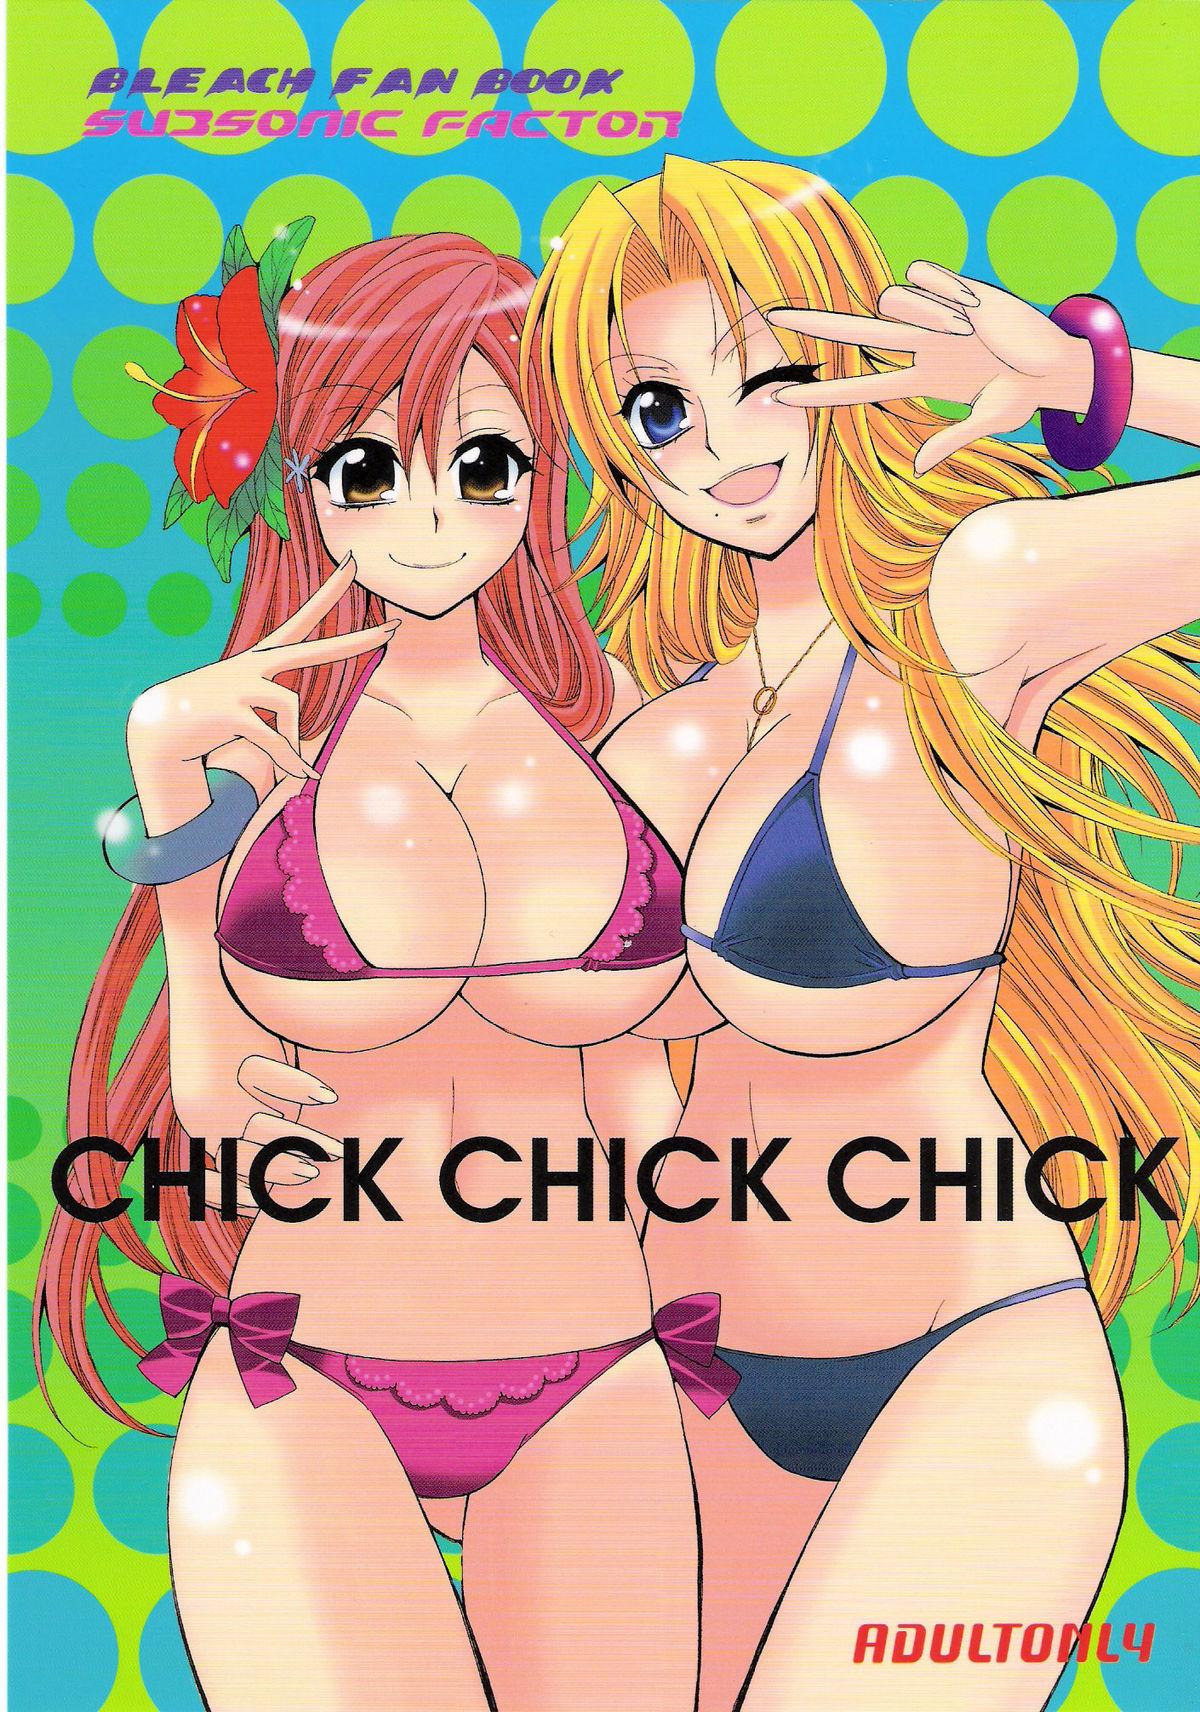 Girl Get Fuck CHICK CHICK CHICK - Bleach Plumper - Page 1